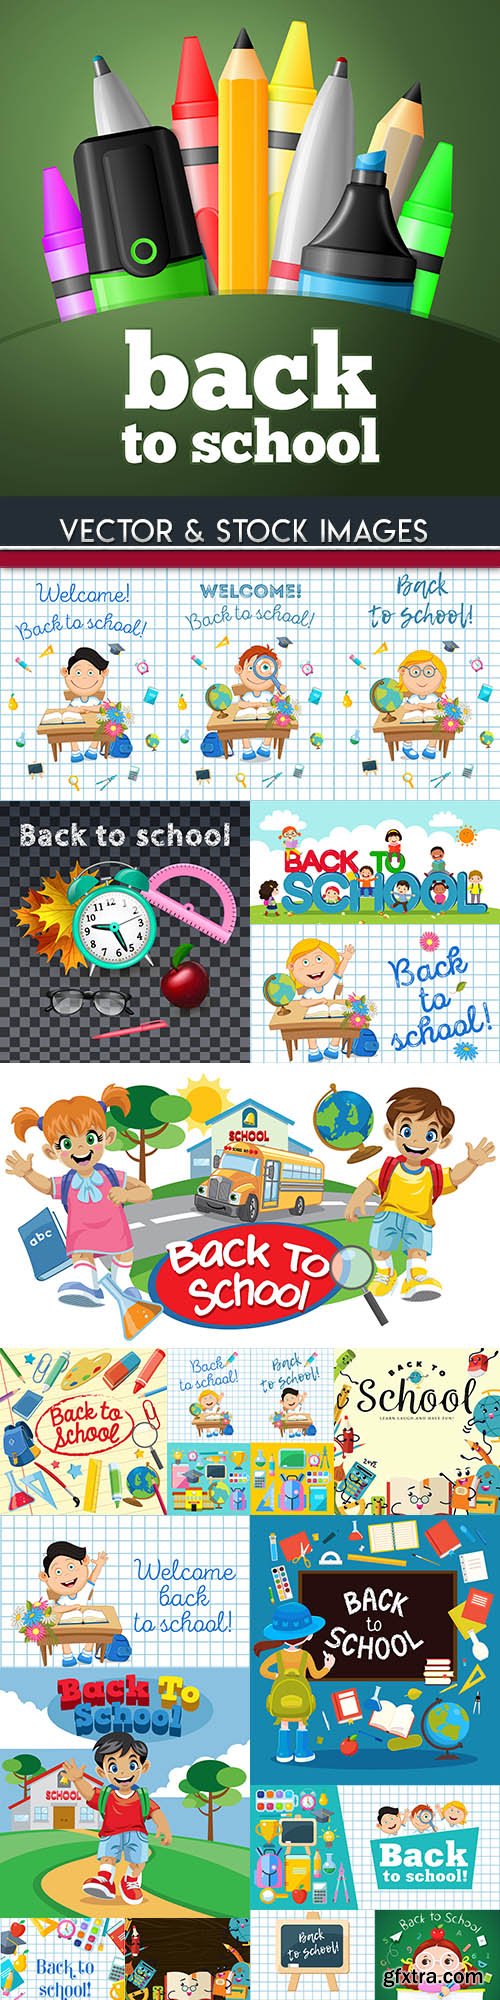 Back to school and accessories collection illustration 33